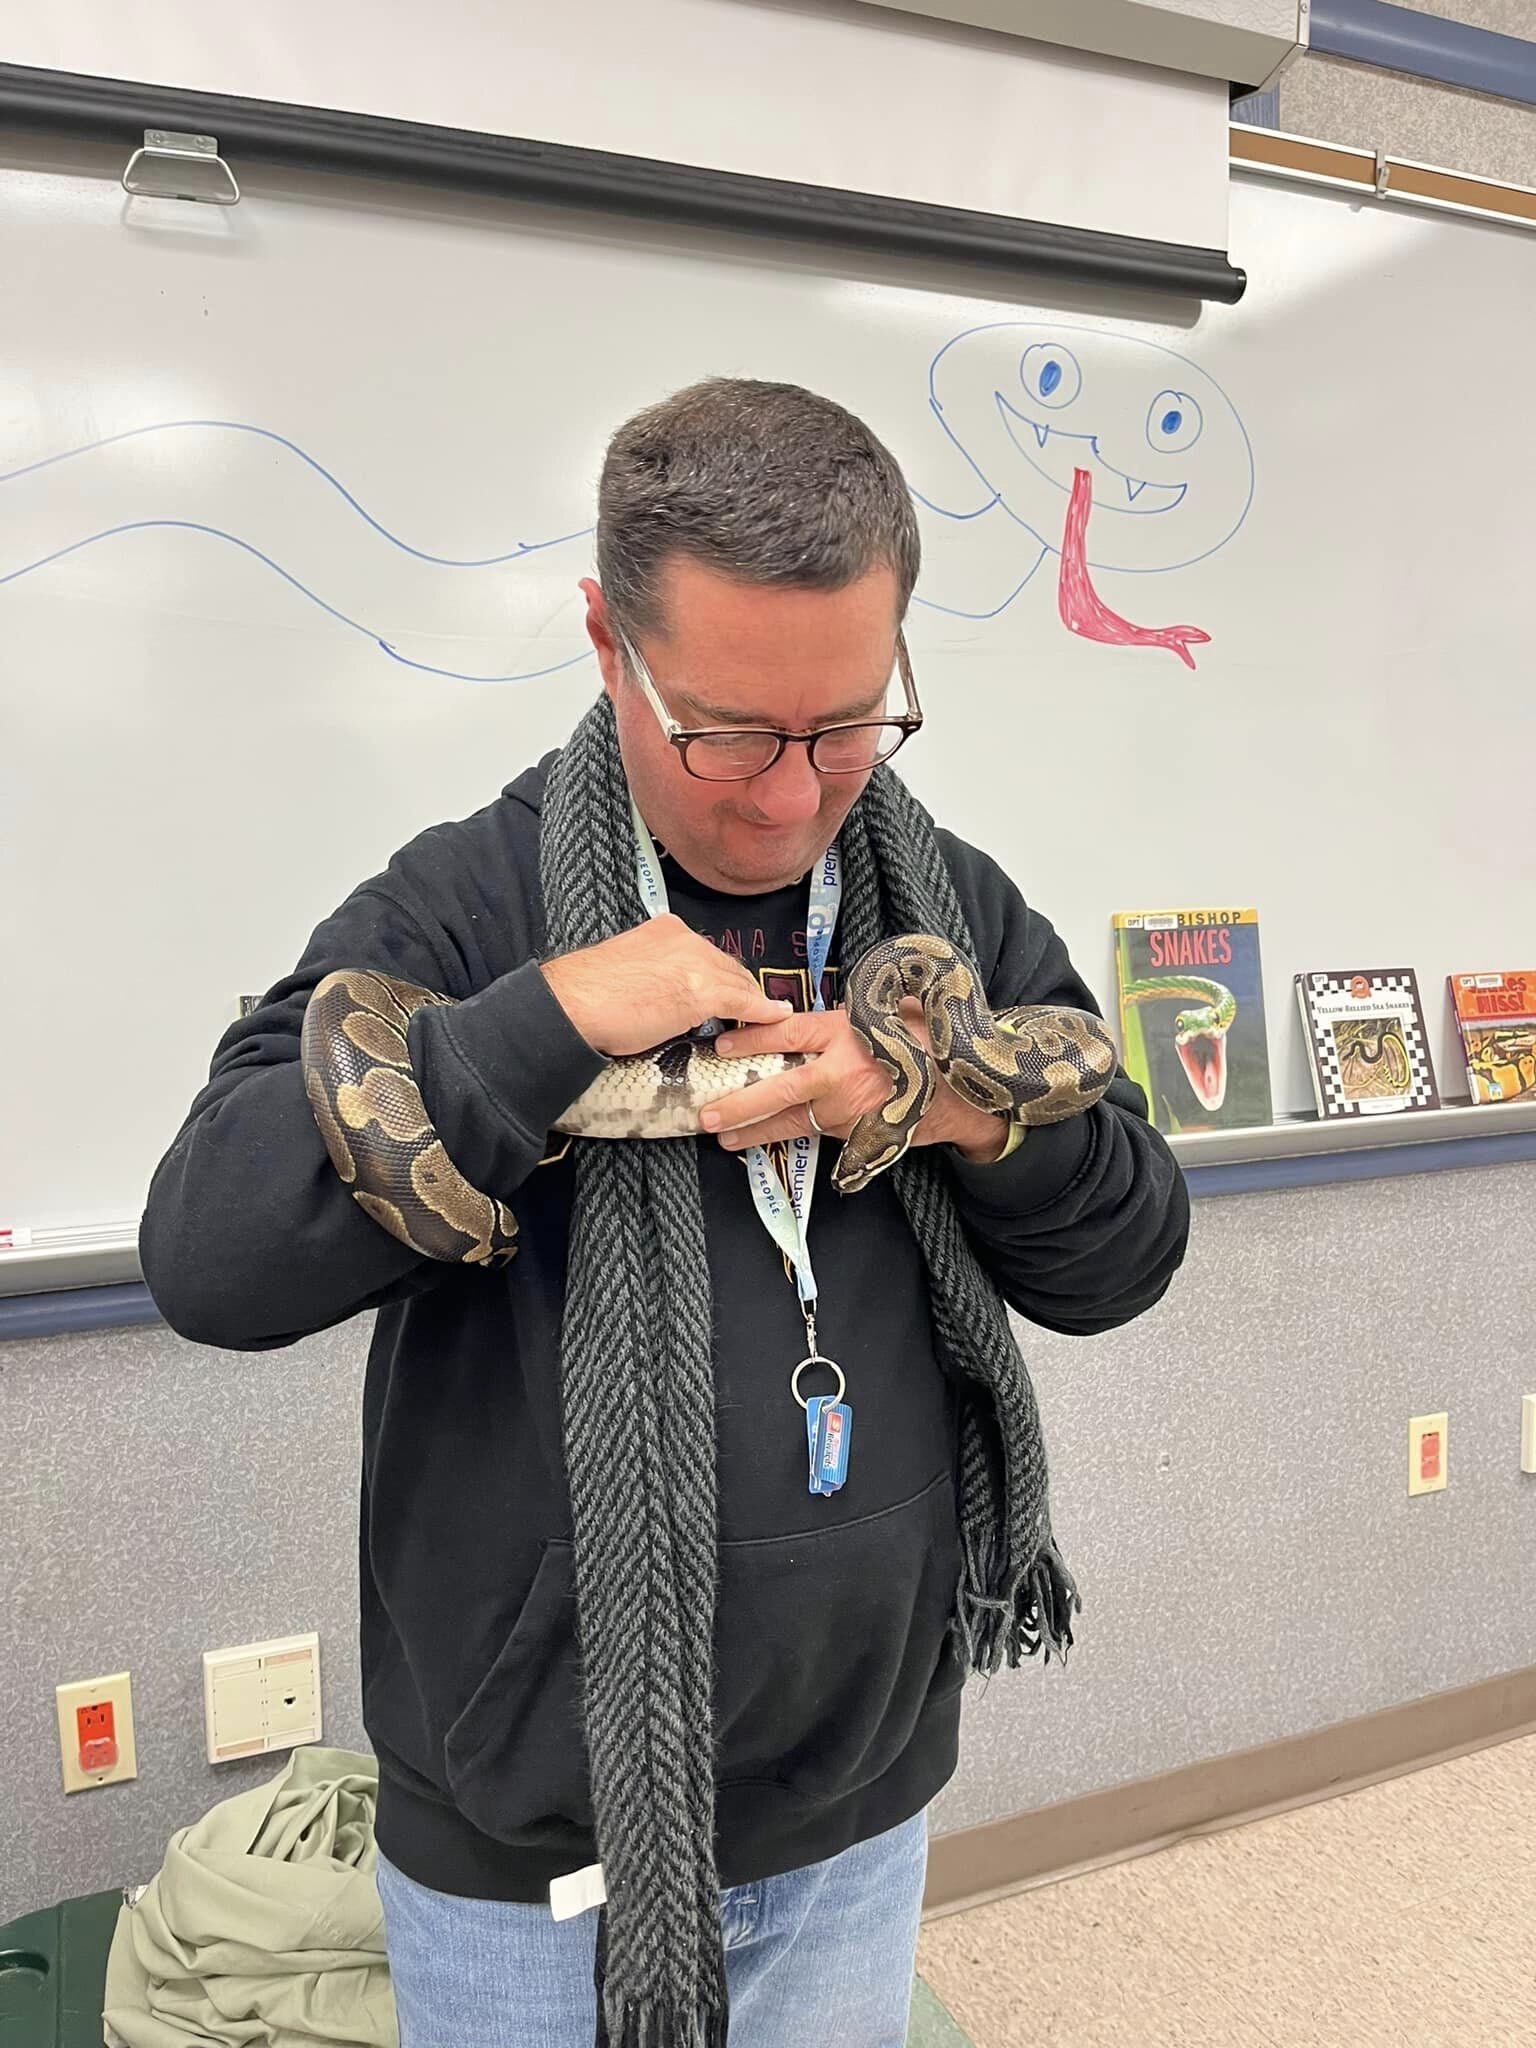 Sometimes the All Abilities Club has animal visitors, like snakes, which gives people the opportunity to hold and learn about the animals.